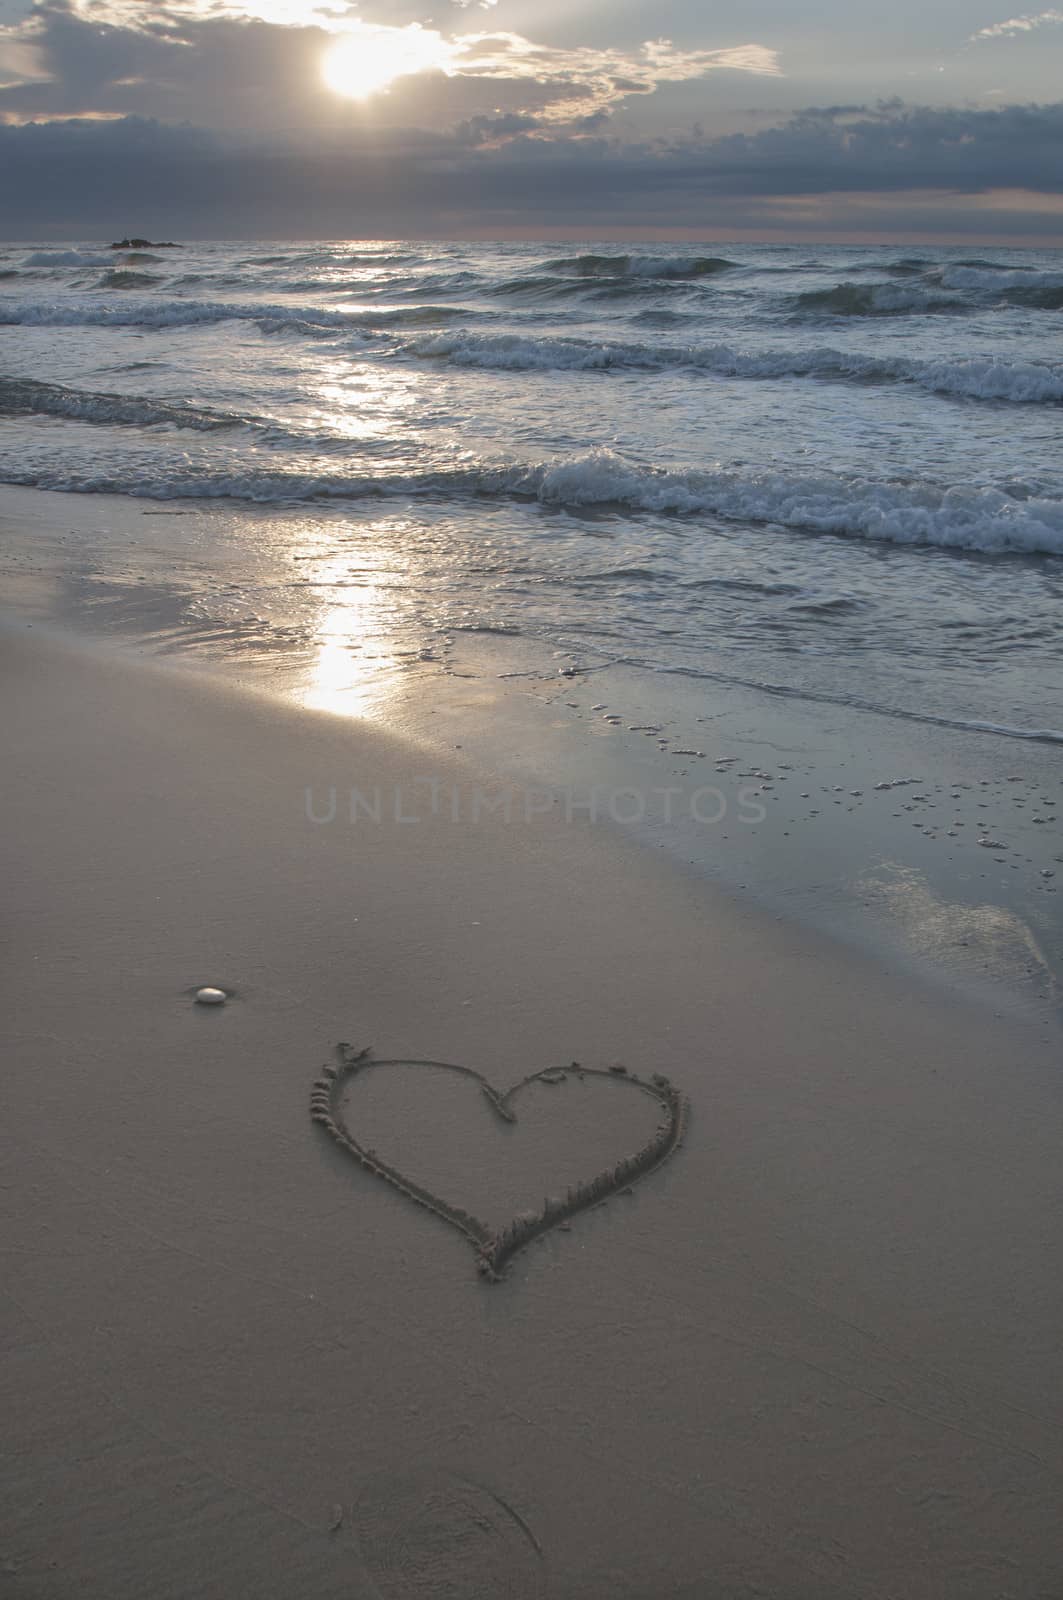 Sunset on the beach with heart drawn in the sand